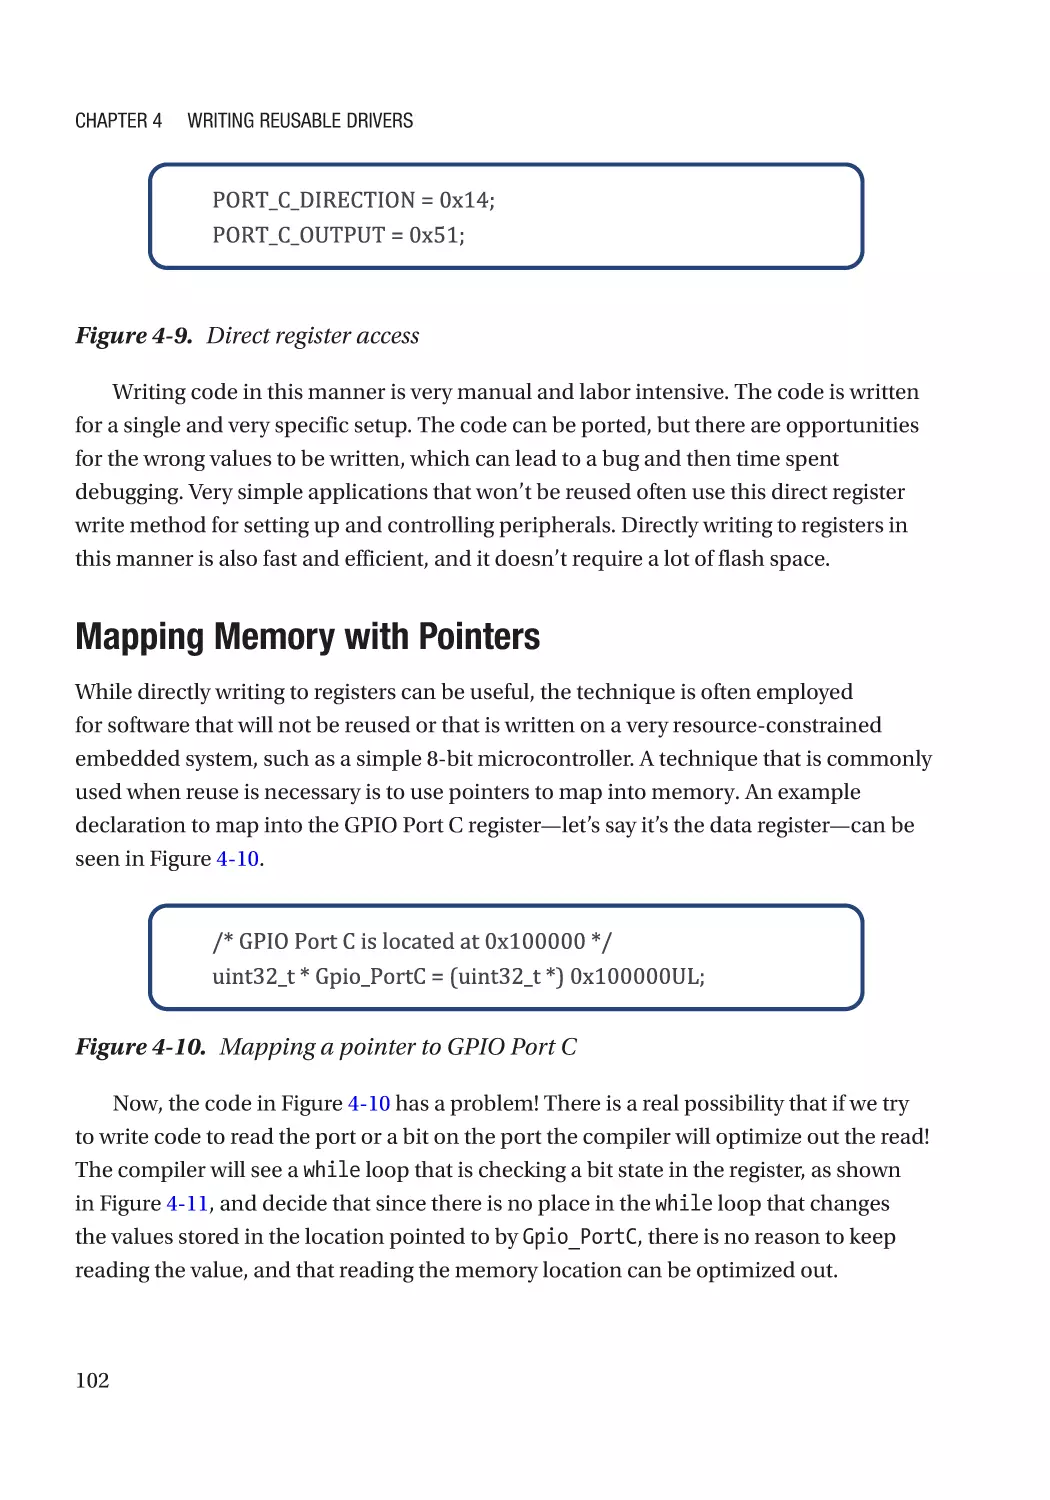 Mapping Memory with Pointers